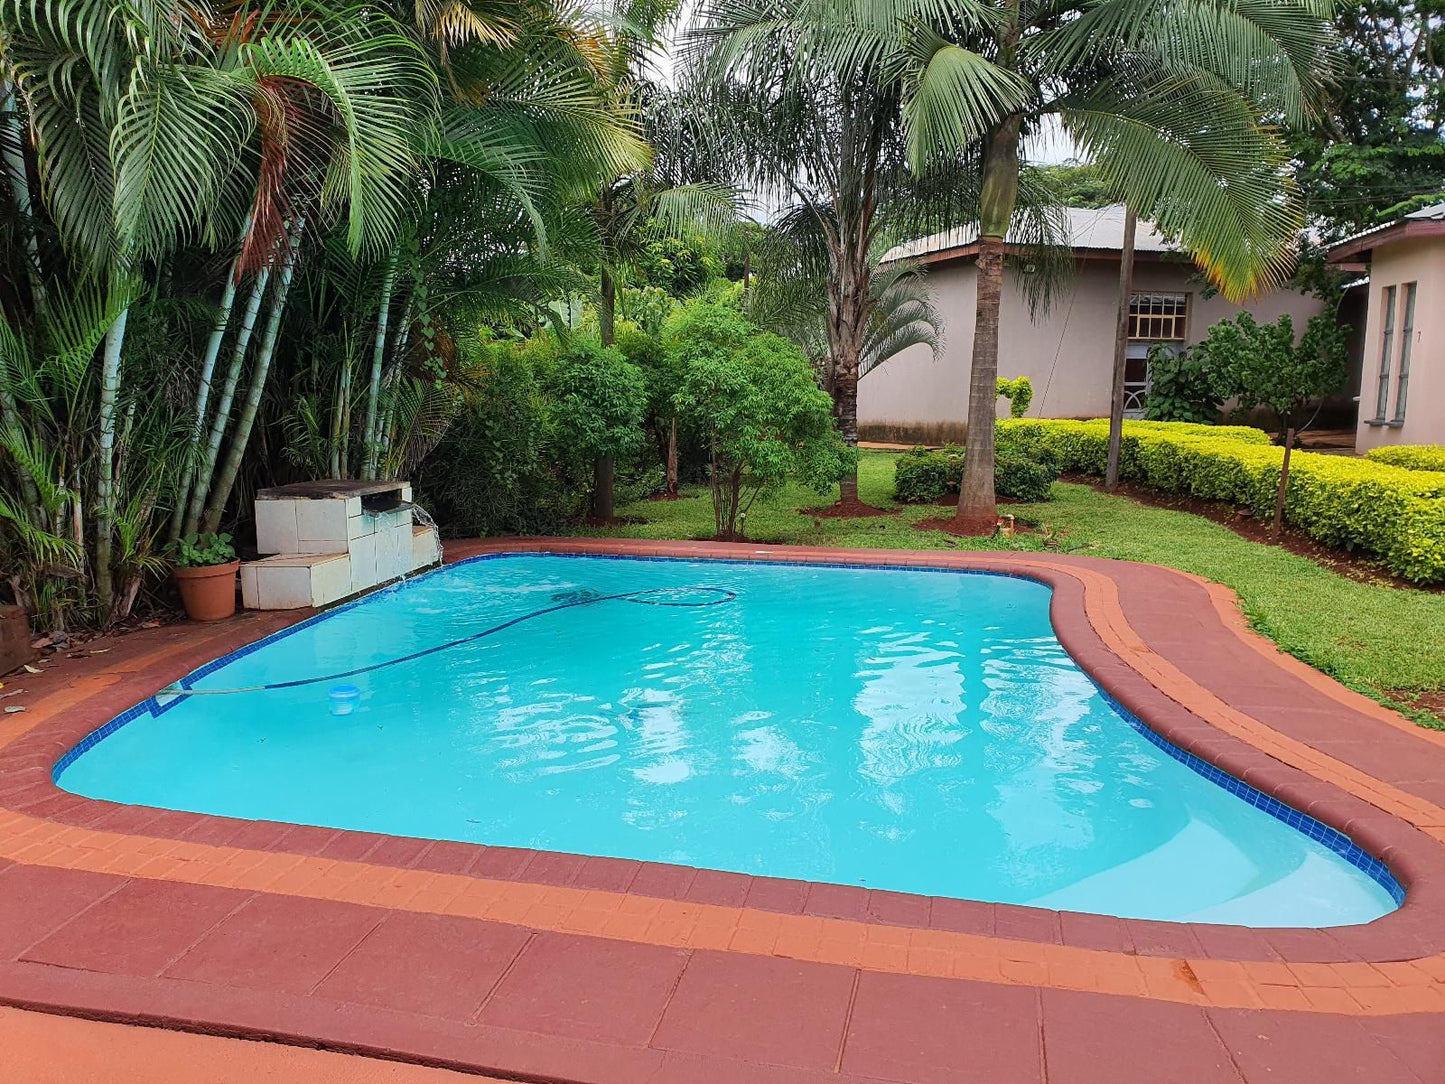 R S Gardens Thohoyandou Limpopo Province South Africa Complementary Colors, Palm Tree, Plant, Nature, Wood, Garden, Swimming Pool